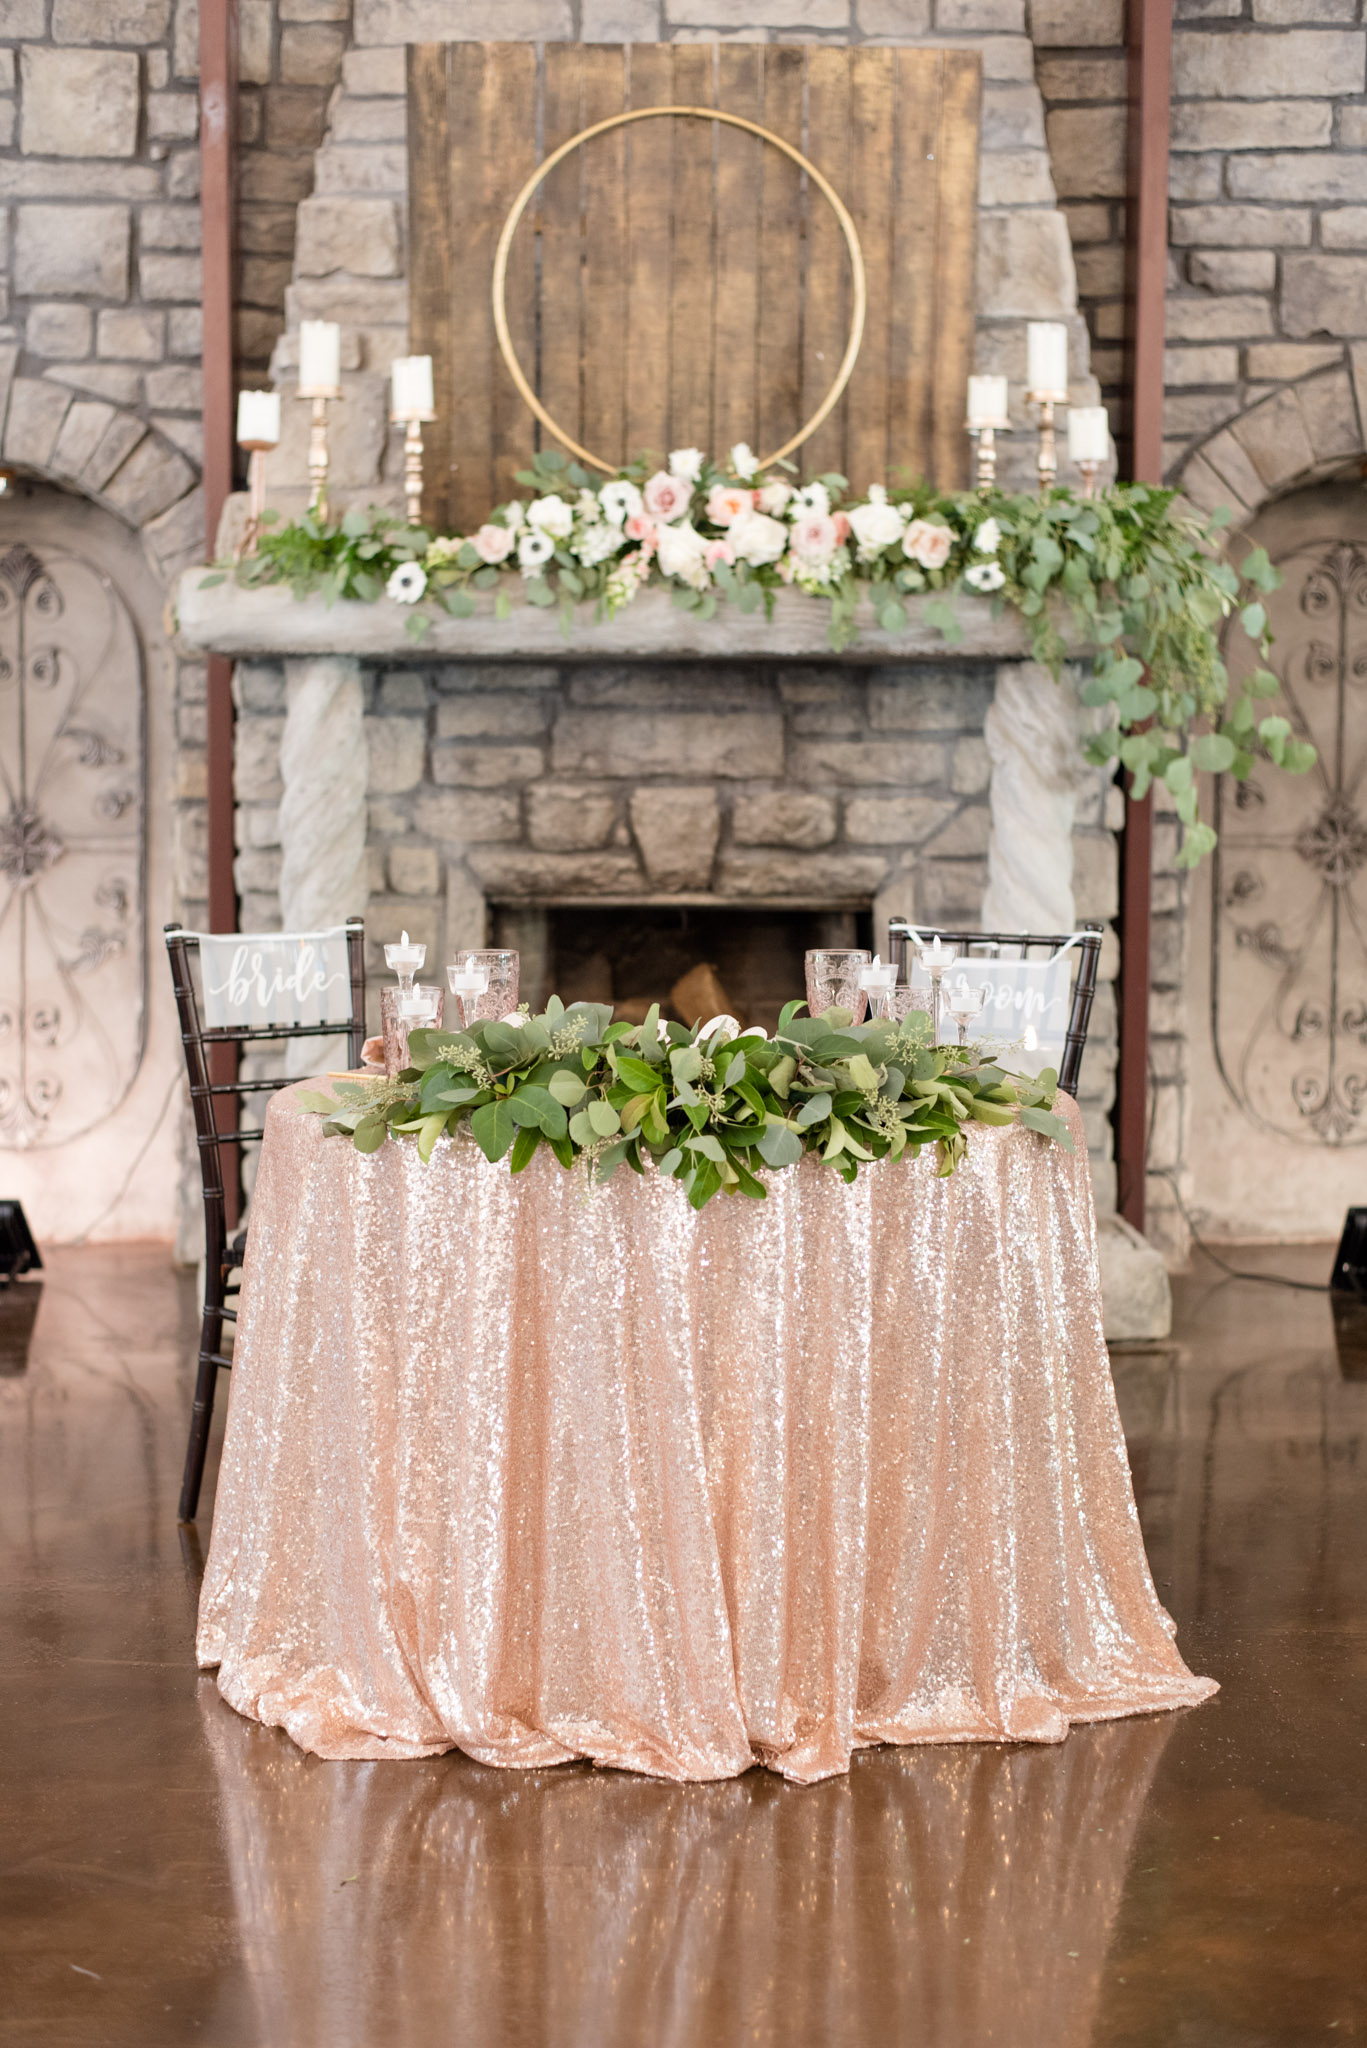 Bride and groom's table with flowers.